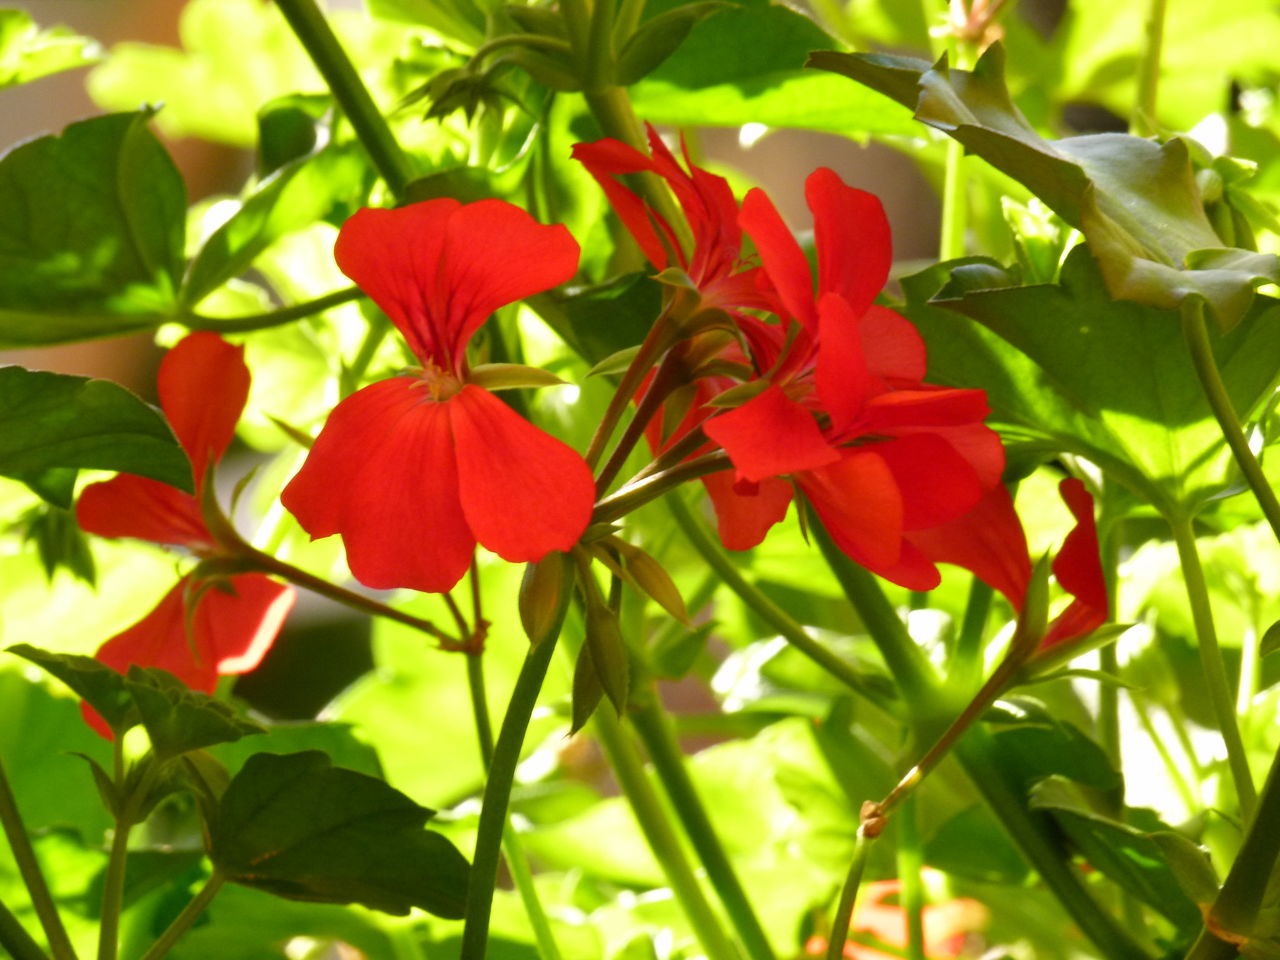 CLOSE-UP OF RED FLOWERS